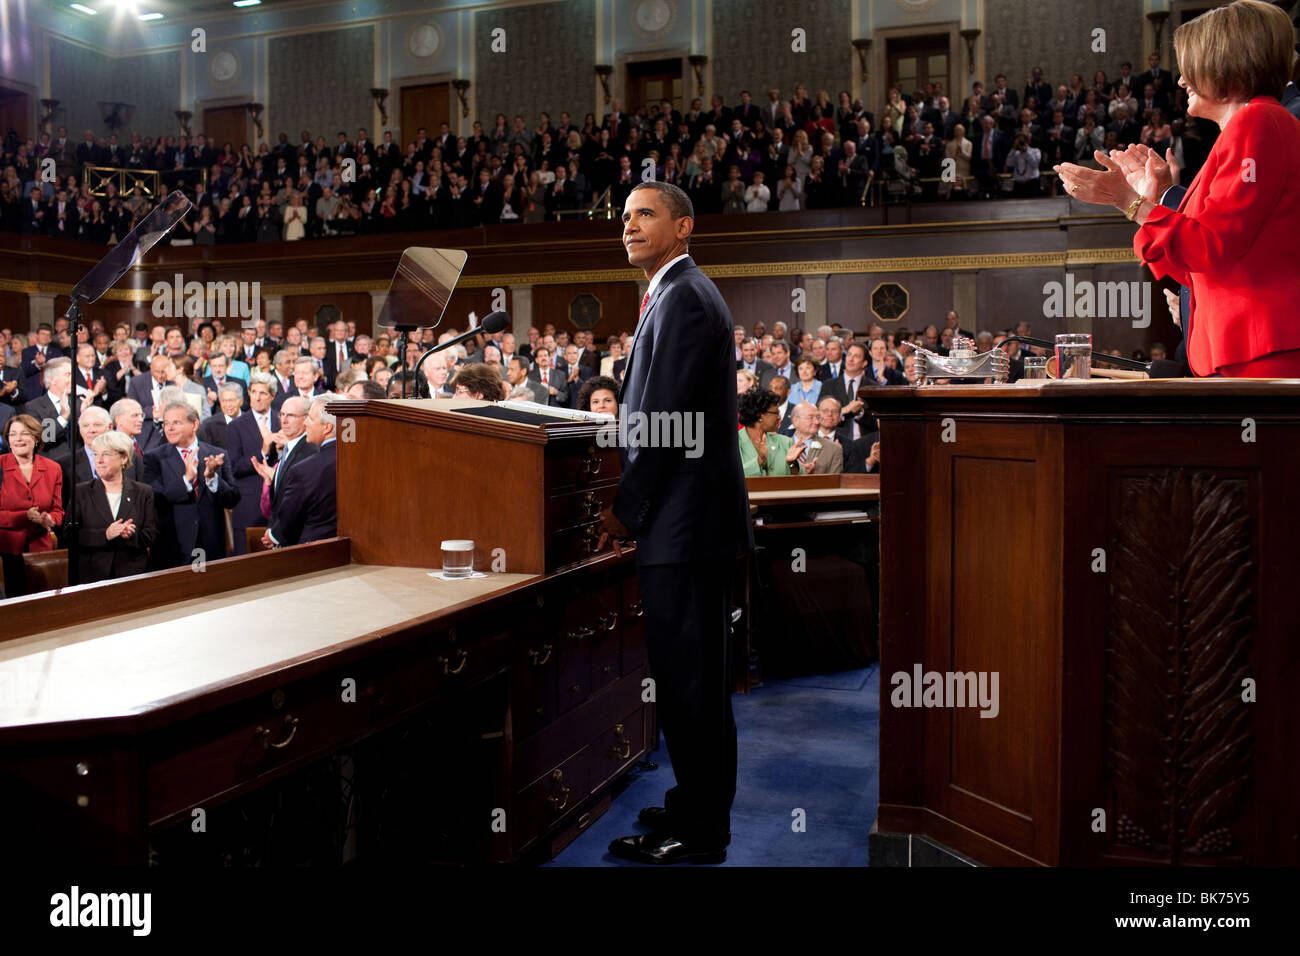 President Obama delivers remarks on health care to a joint session of Congress, at the U.S. Capitol Stock Photo